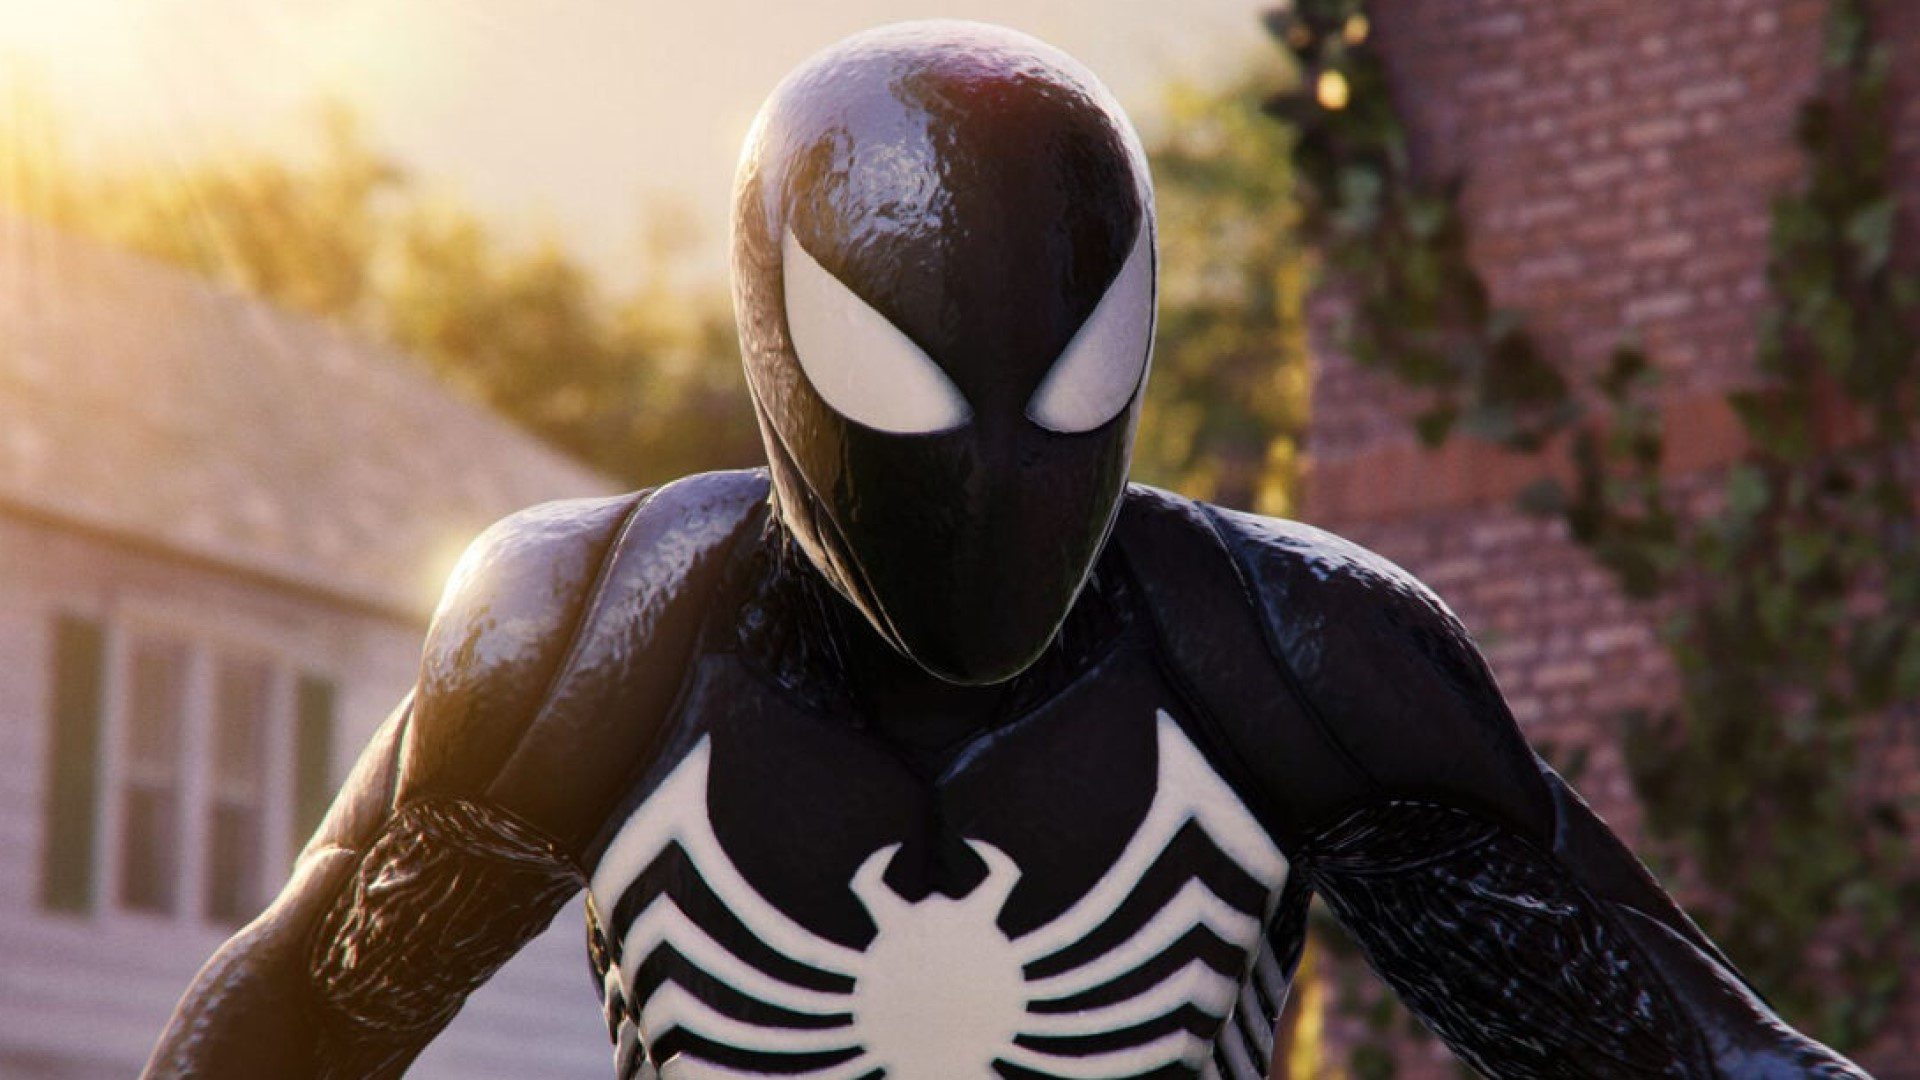 PlayStation layoffs are confirmed to have impacted Insomniac Games, the studio behind Marvel’s Spider-Man